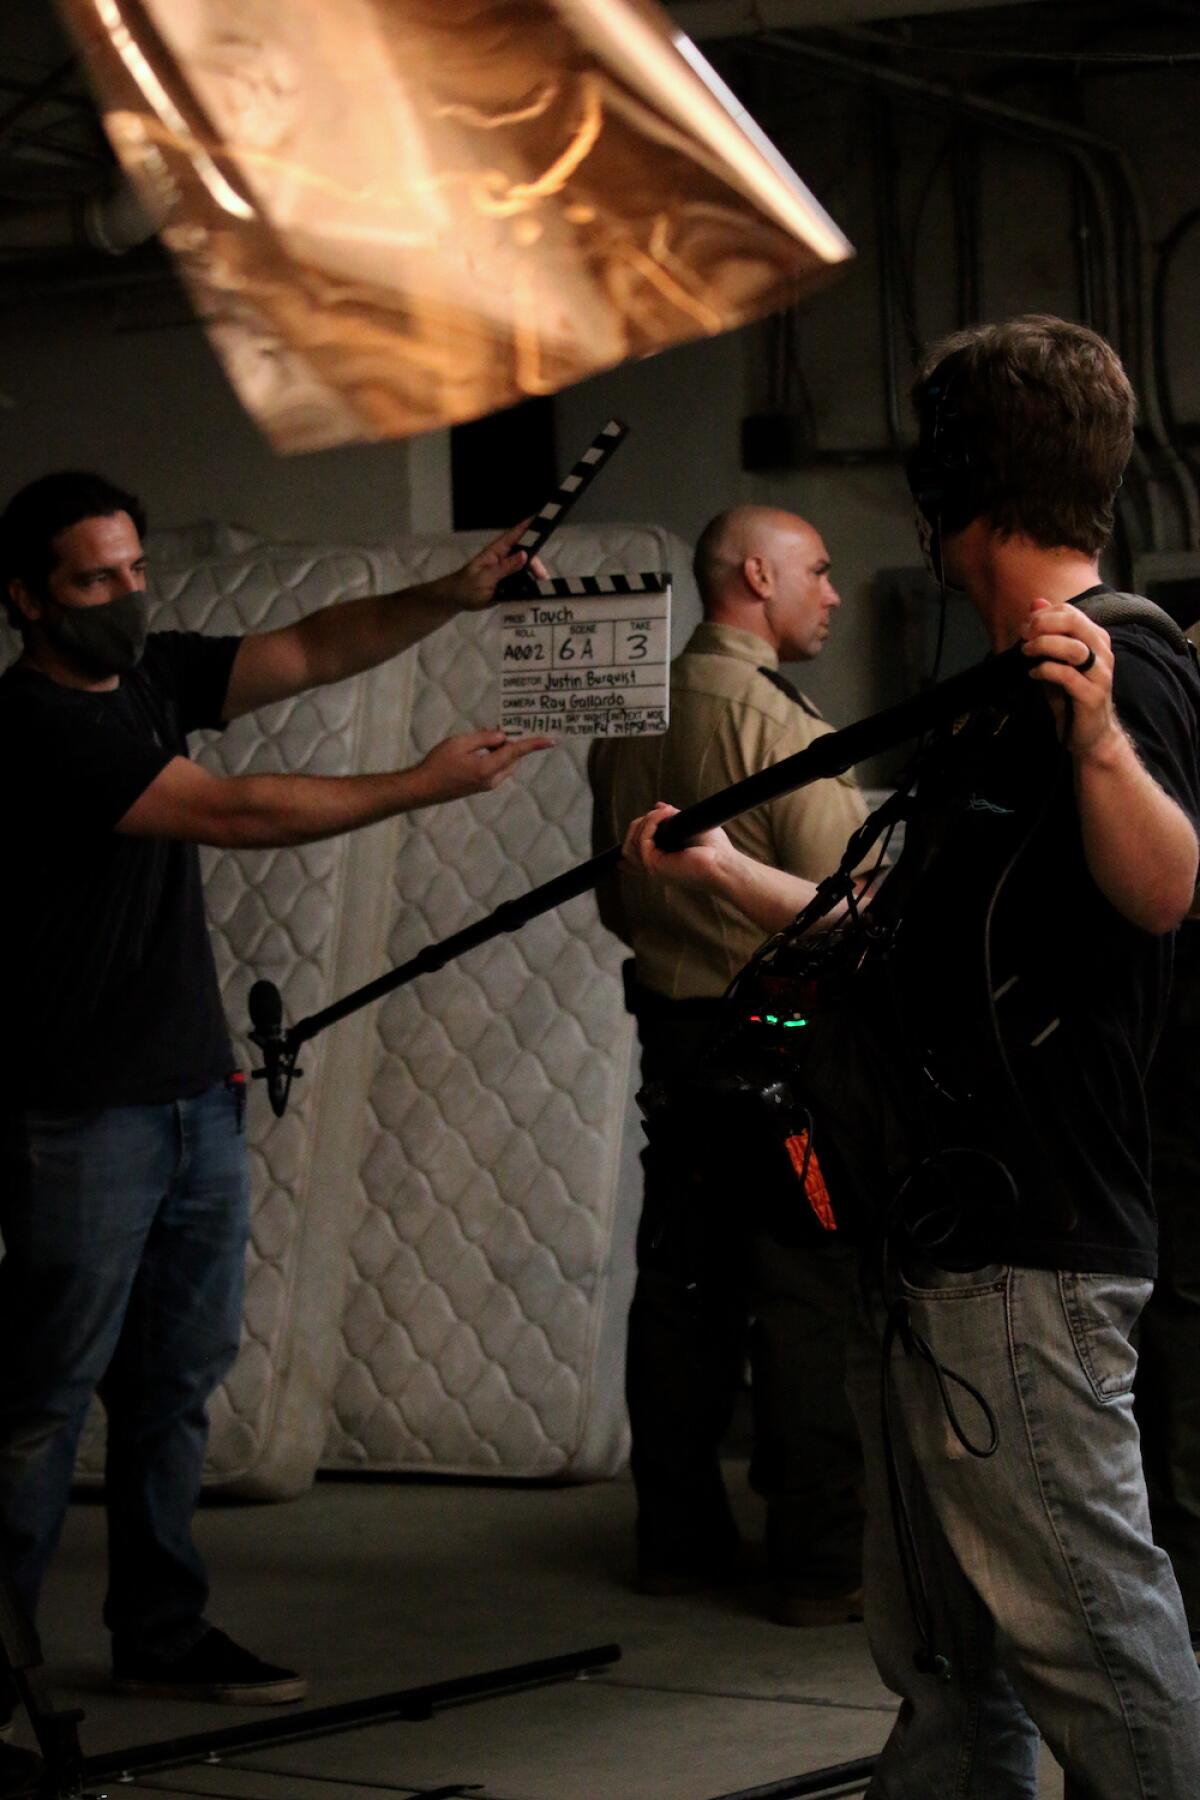 Martin McCarthy, supporting actor Jayce Venditti and visual effects artist John Menvielle work on the set of "Touch."